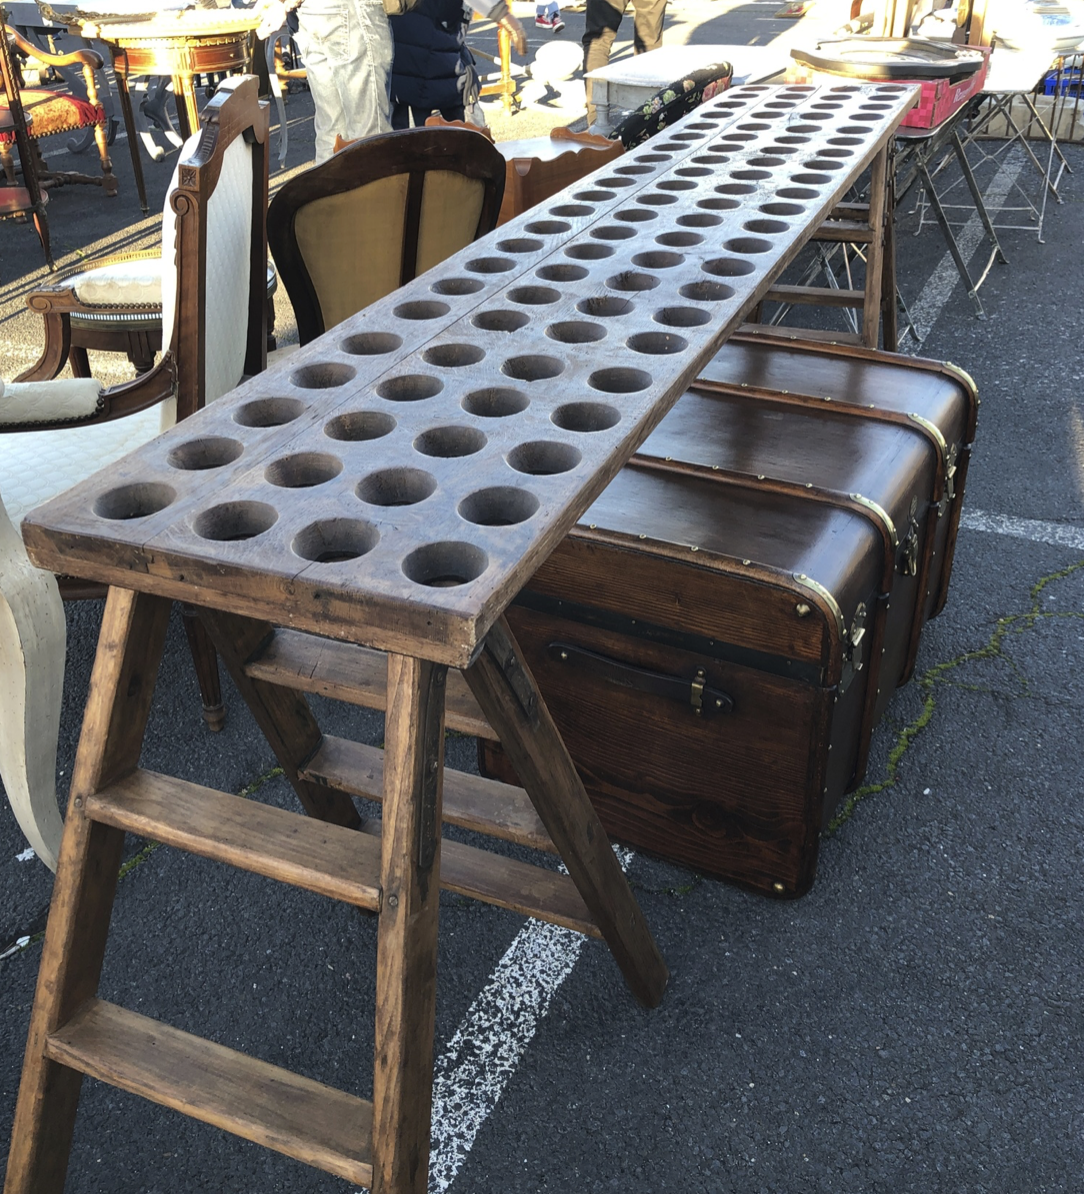 This is a super fun console made from a couple of old crunchy ladders and a vintage wine rack.